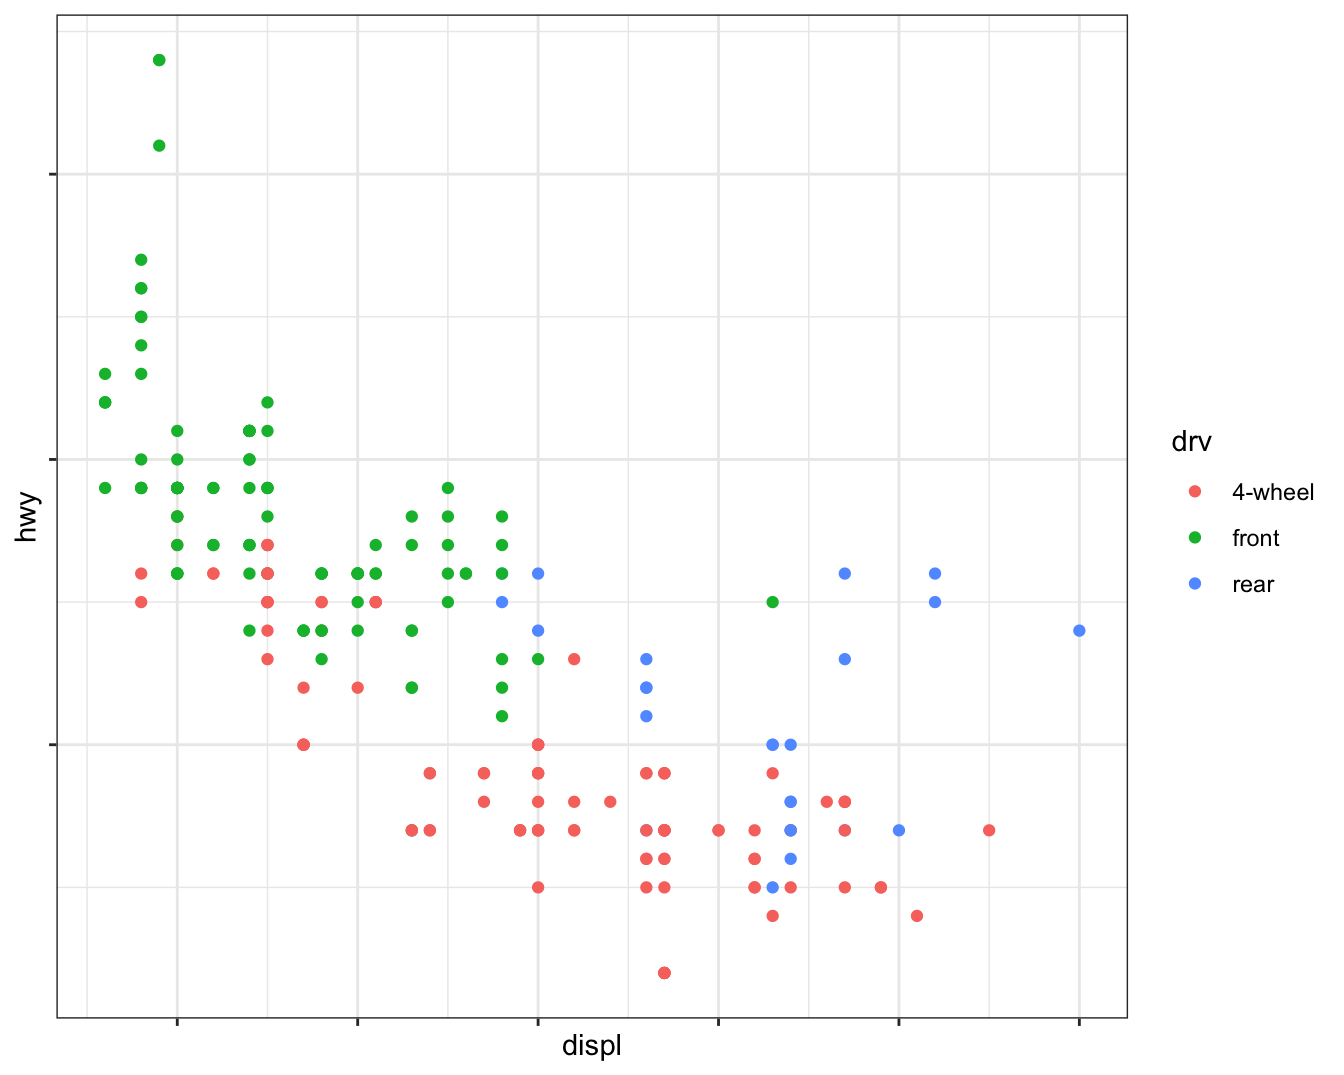 Scatterplot of highway fuel efficiency versus engine size of cars, colored
by drive. The x and y-axes do not have any labels at the axis ticks.
The legend has custom labels: 4-wheel, front, rear.